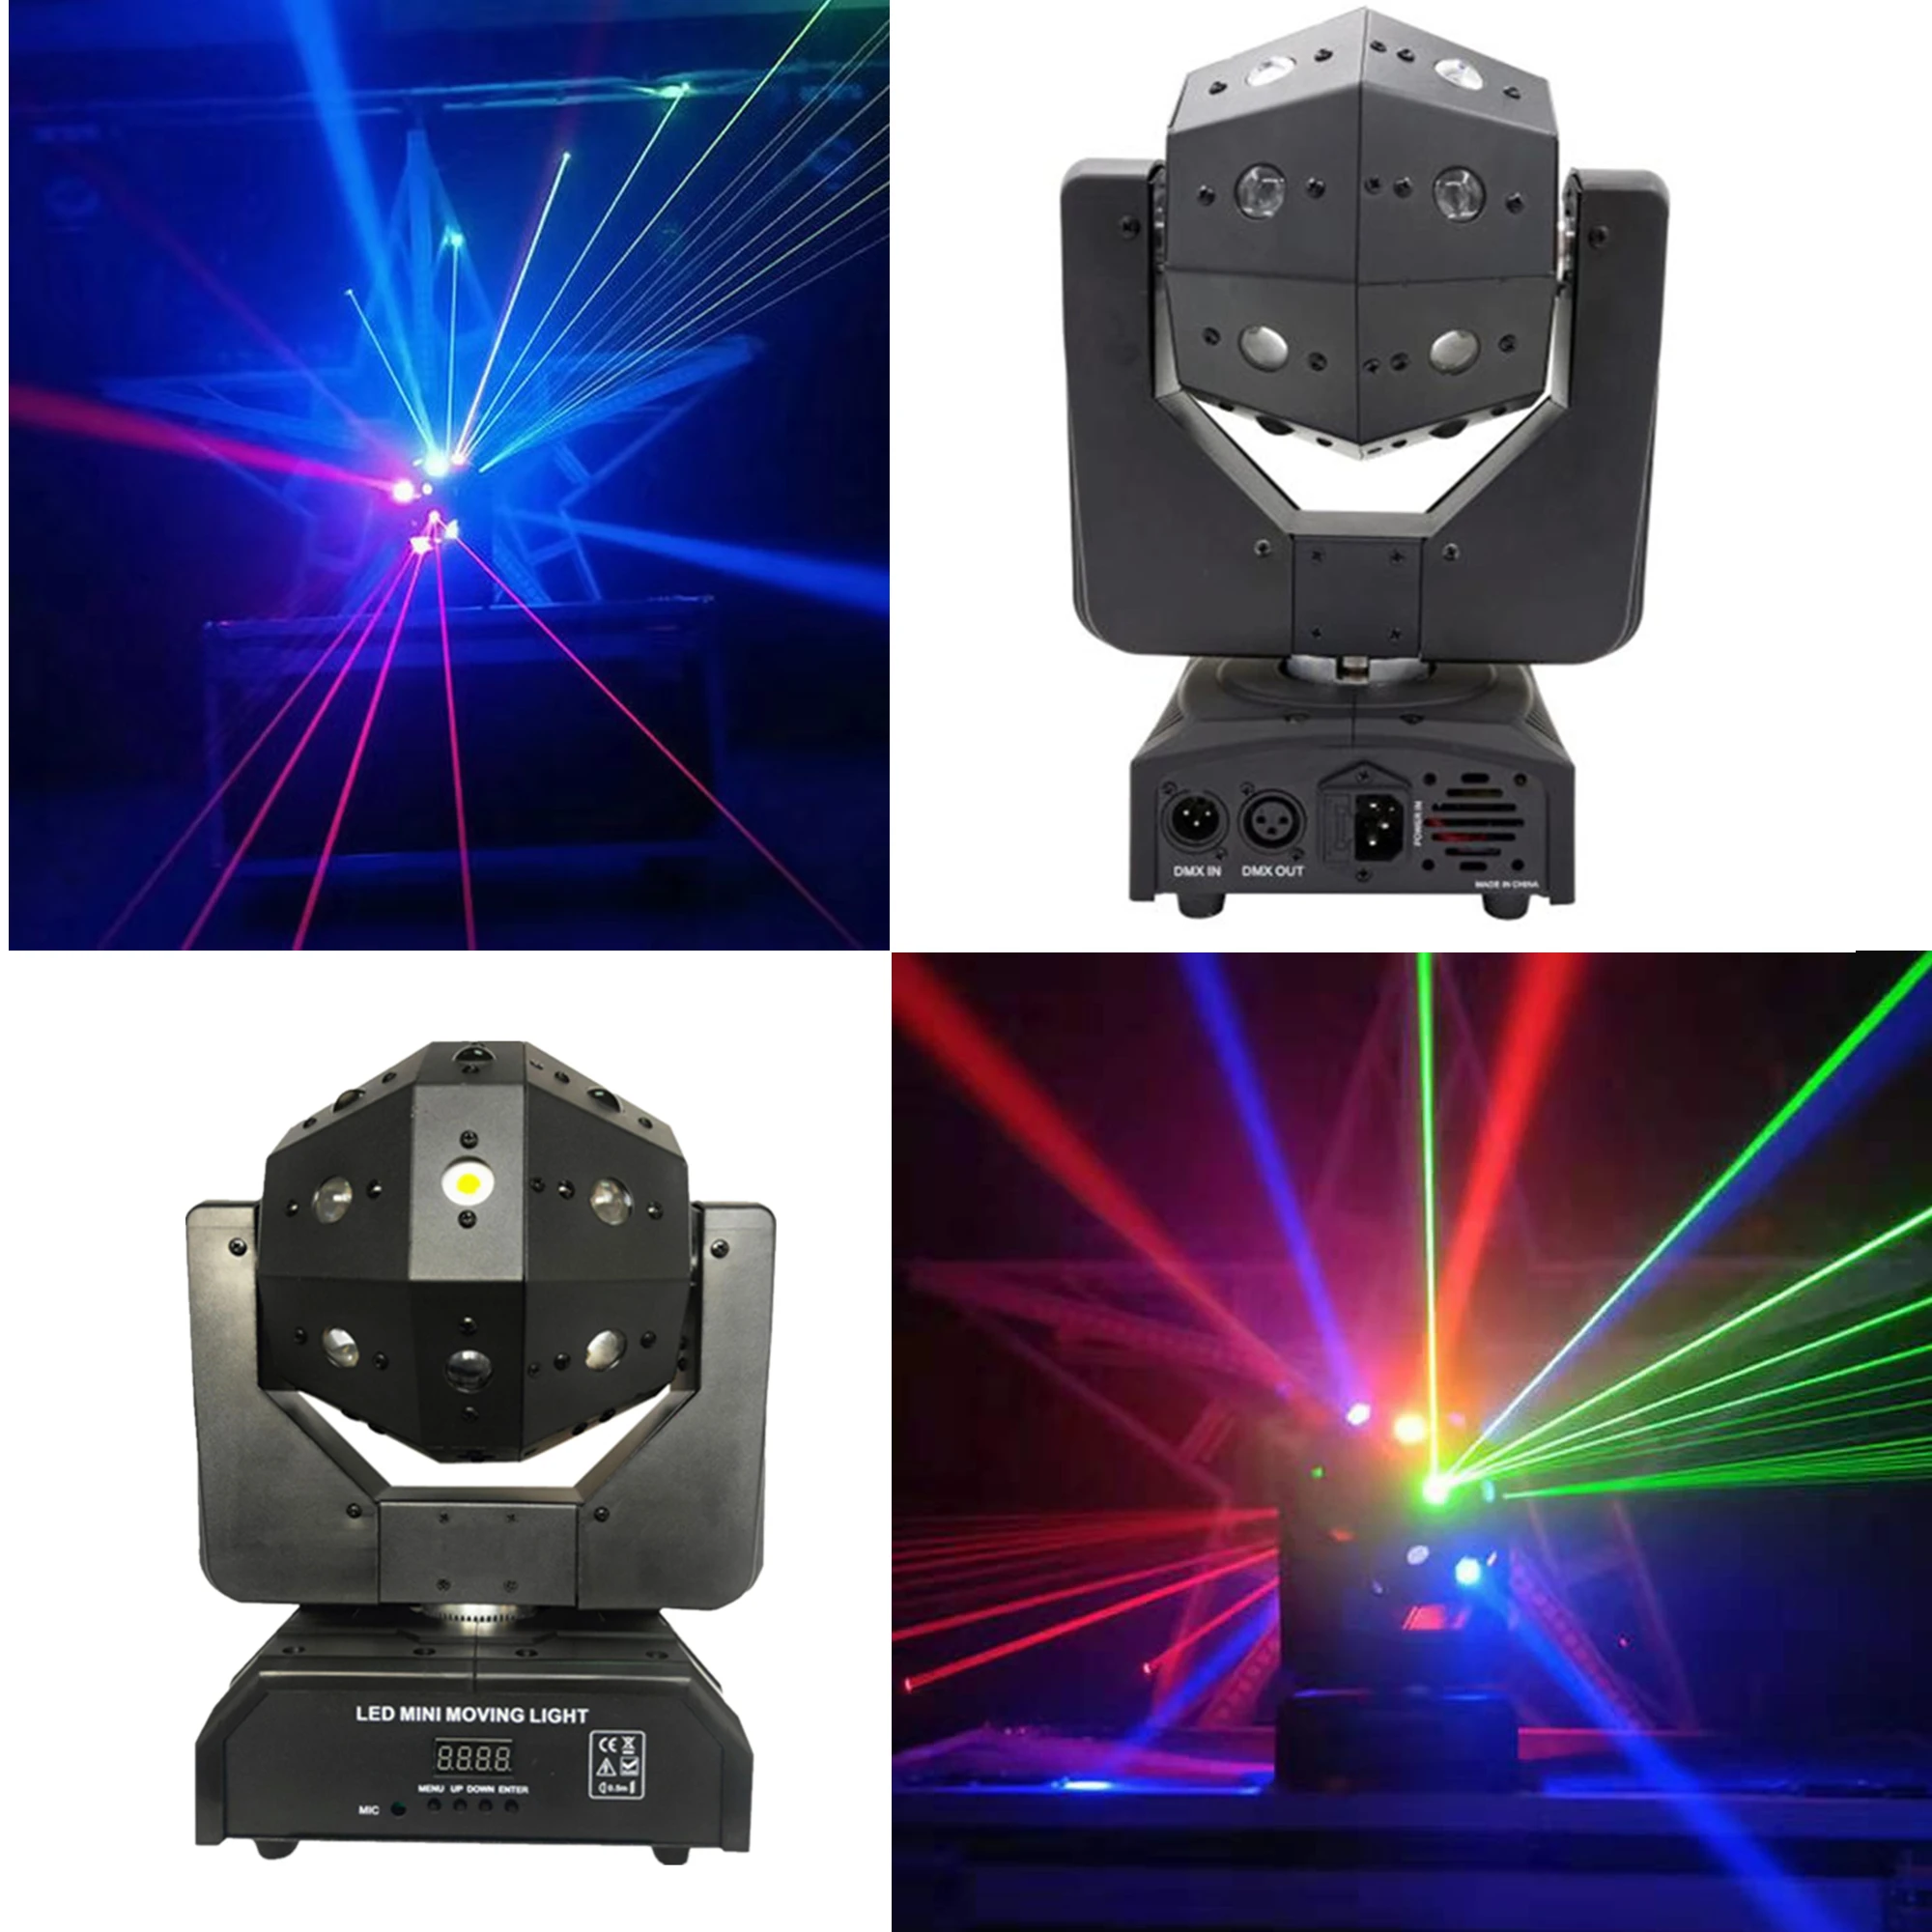 16X3W laser beam effect three-in-one professional DMX control, strobe is suitable for music parties, dance halls, etc.